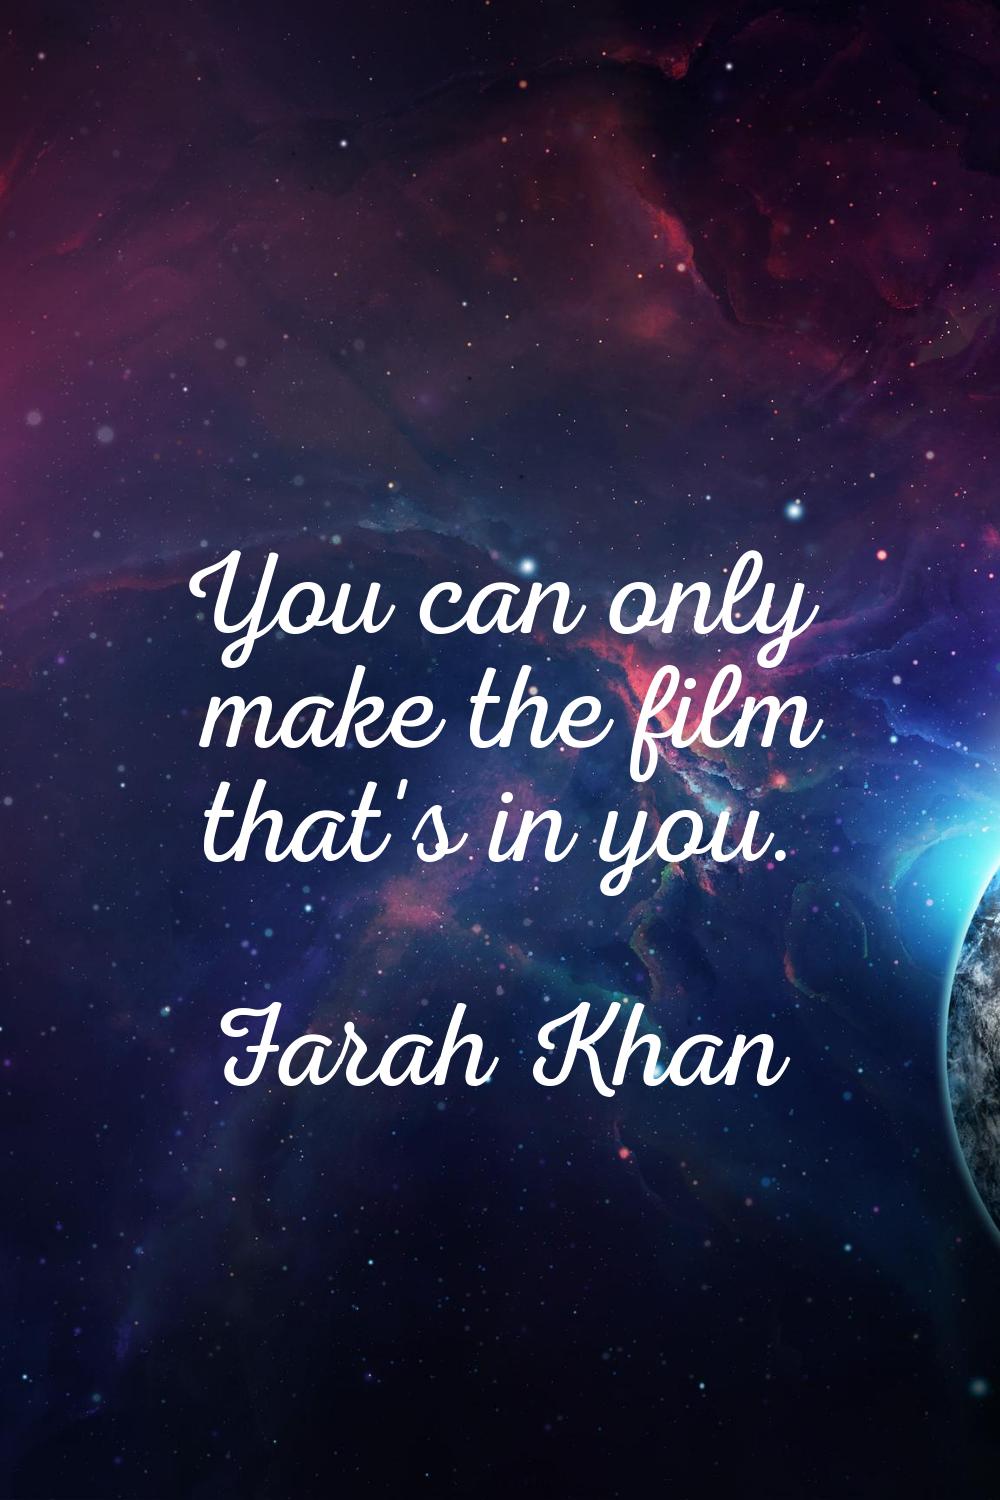 You can only make the film that's in you.